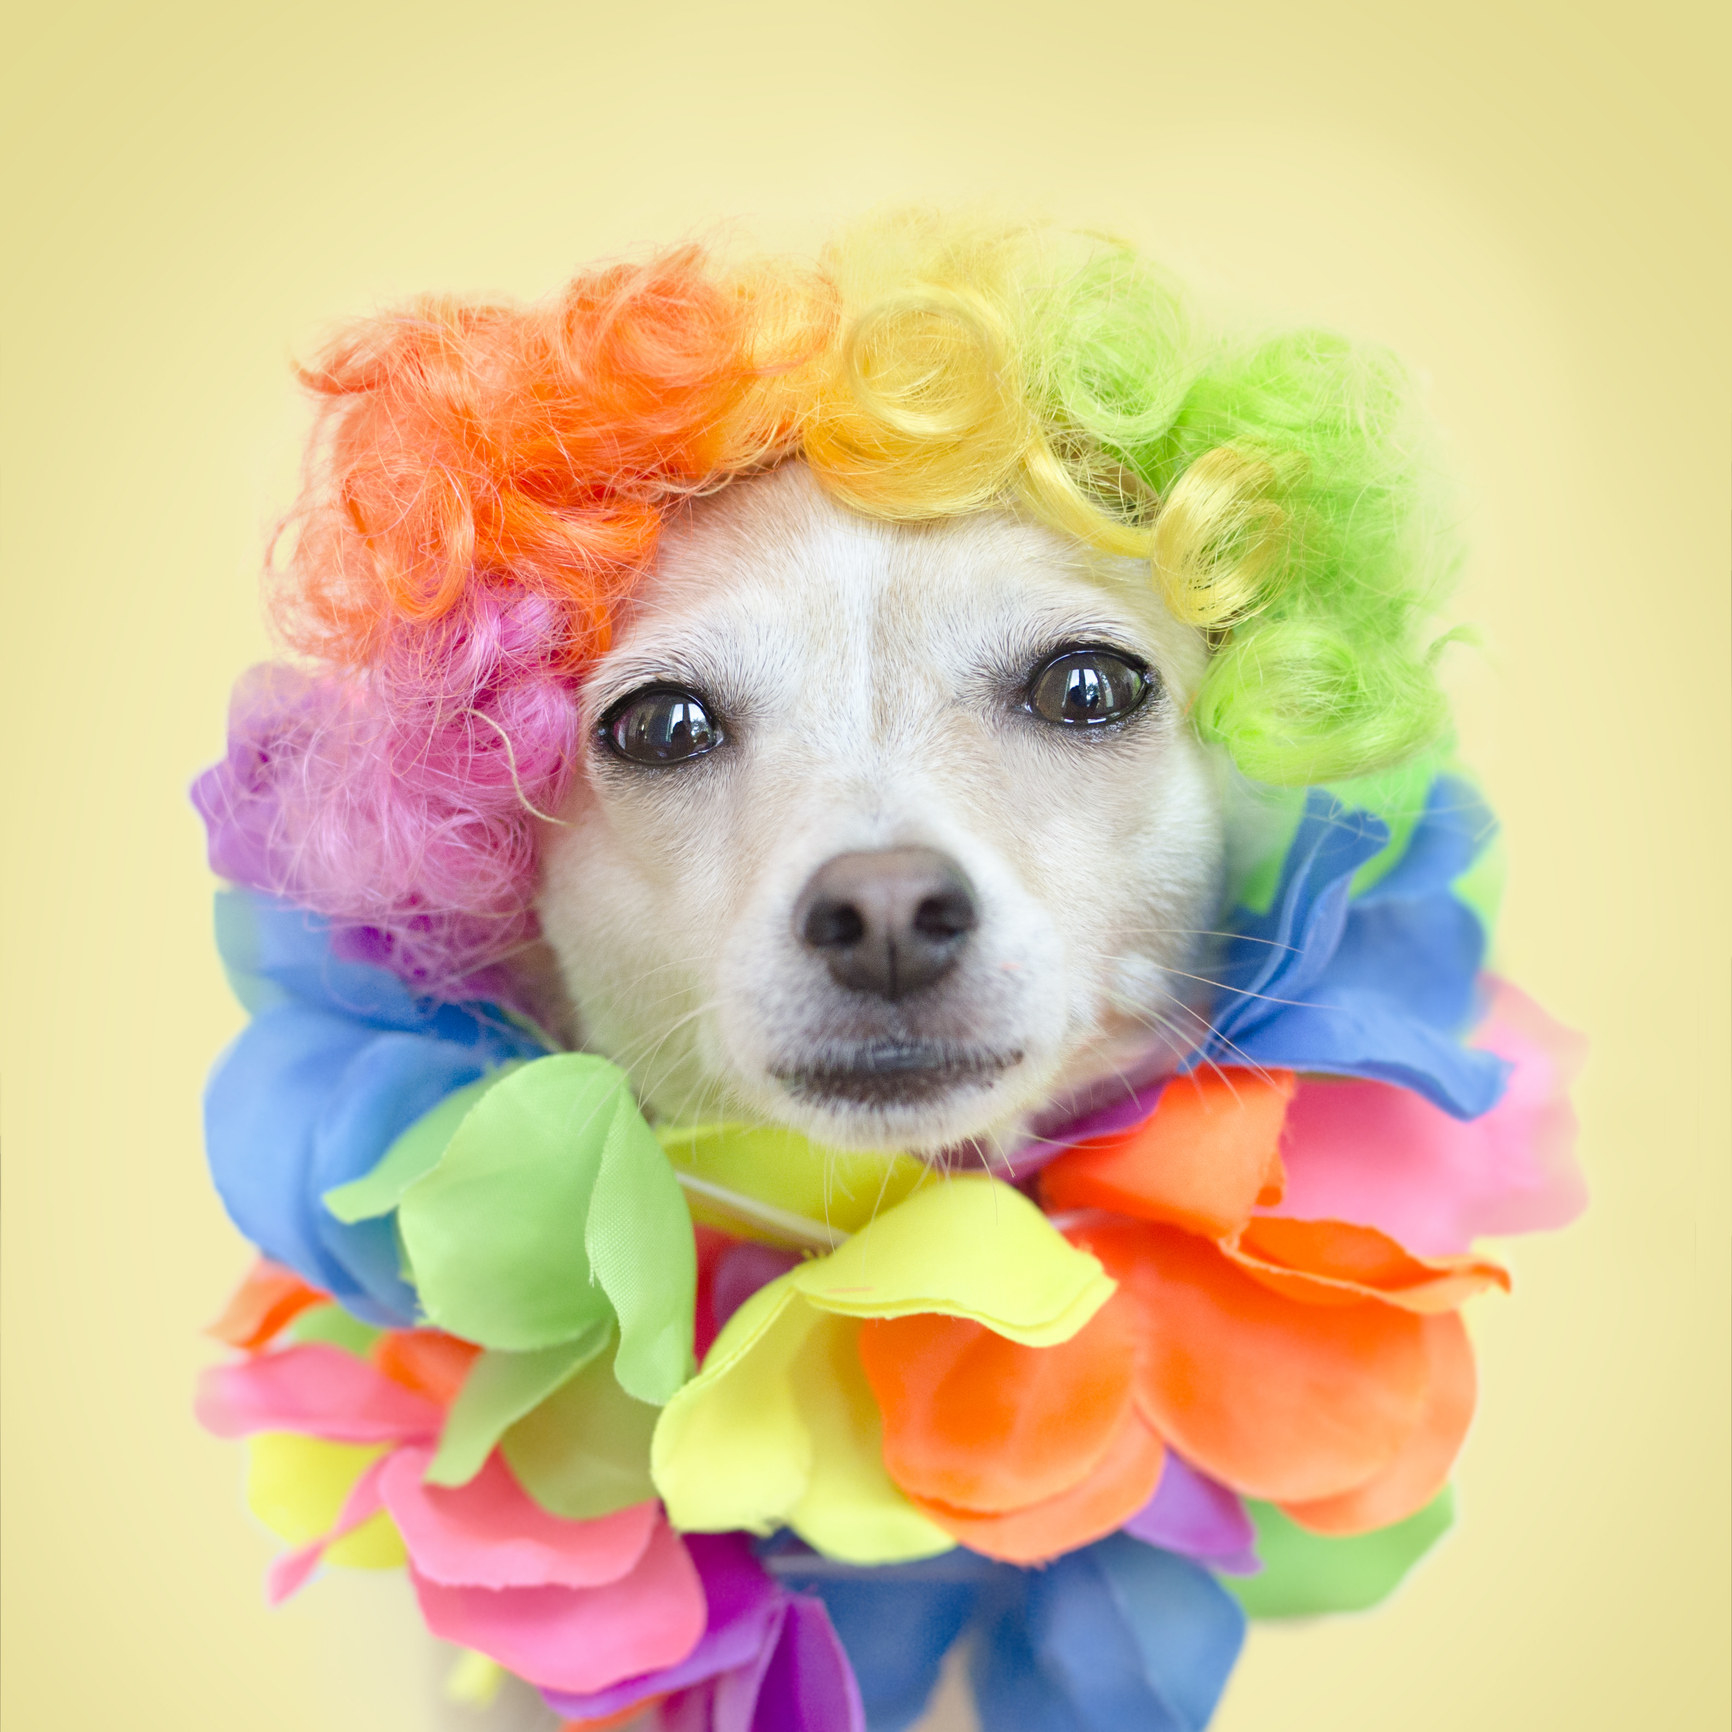 Another dog in rainbow colors